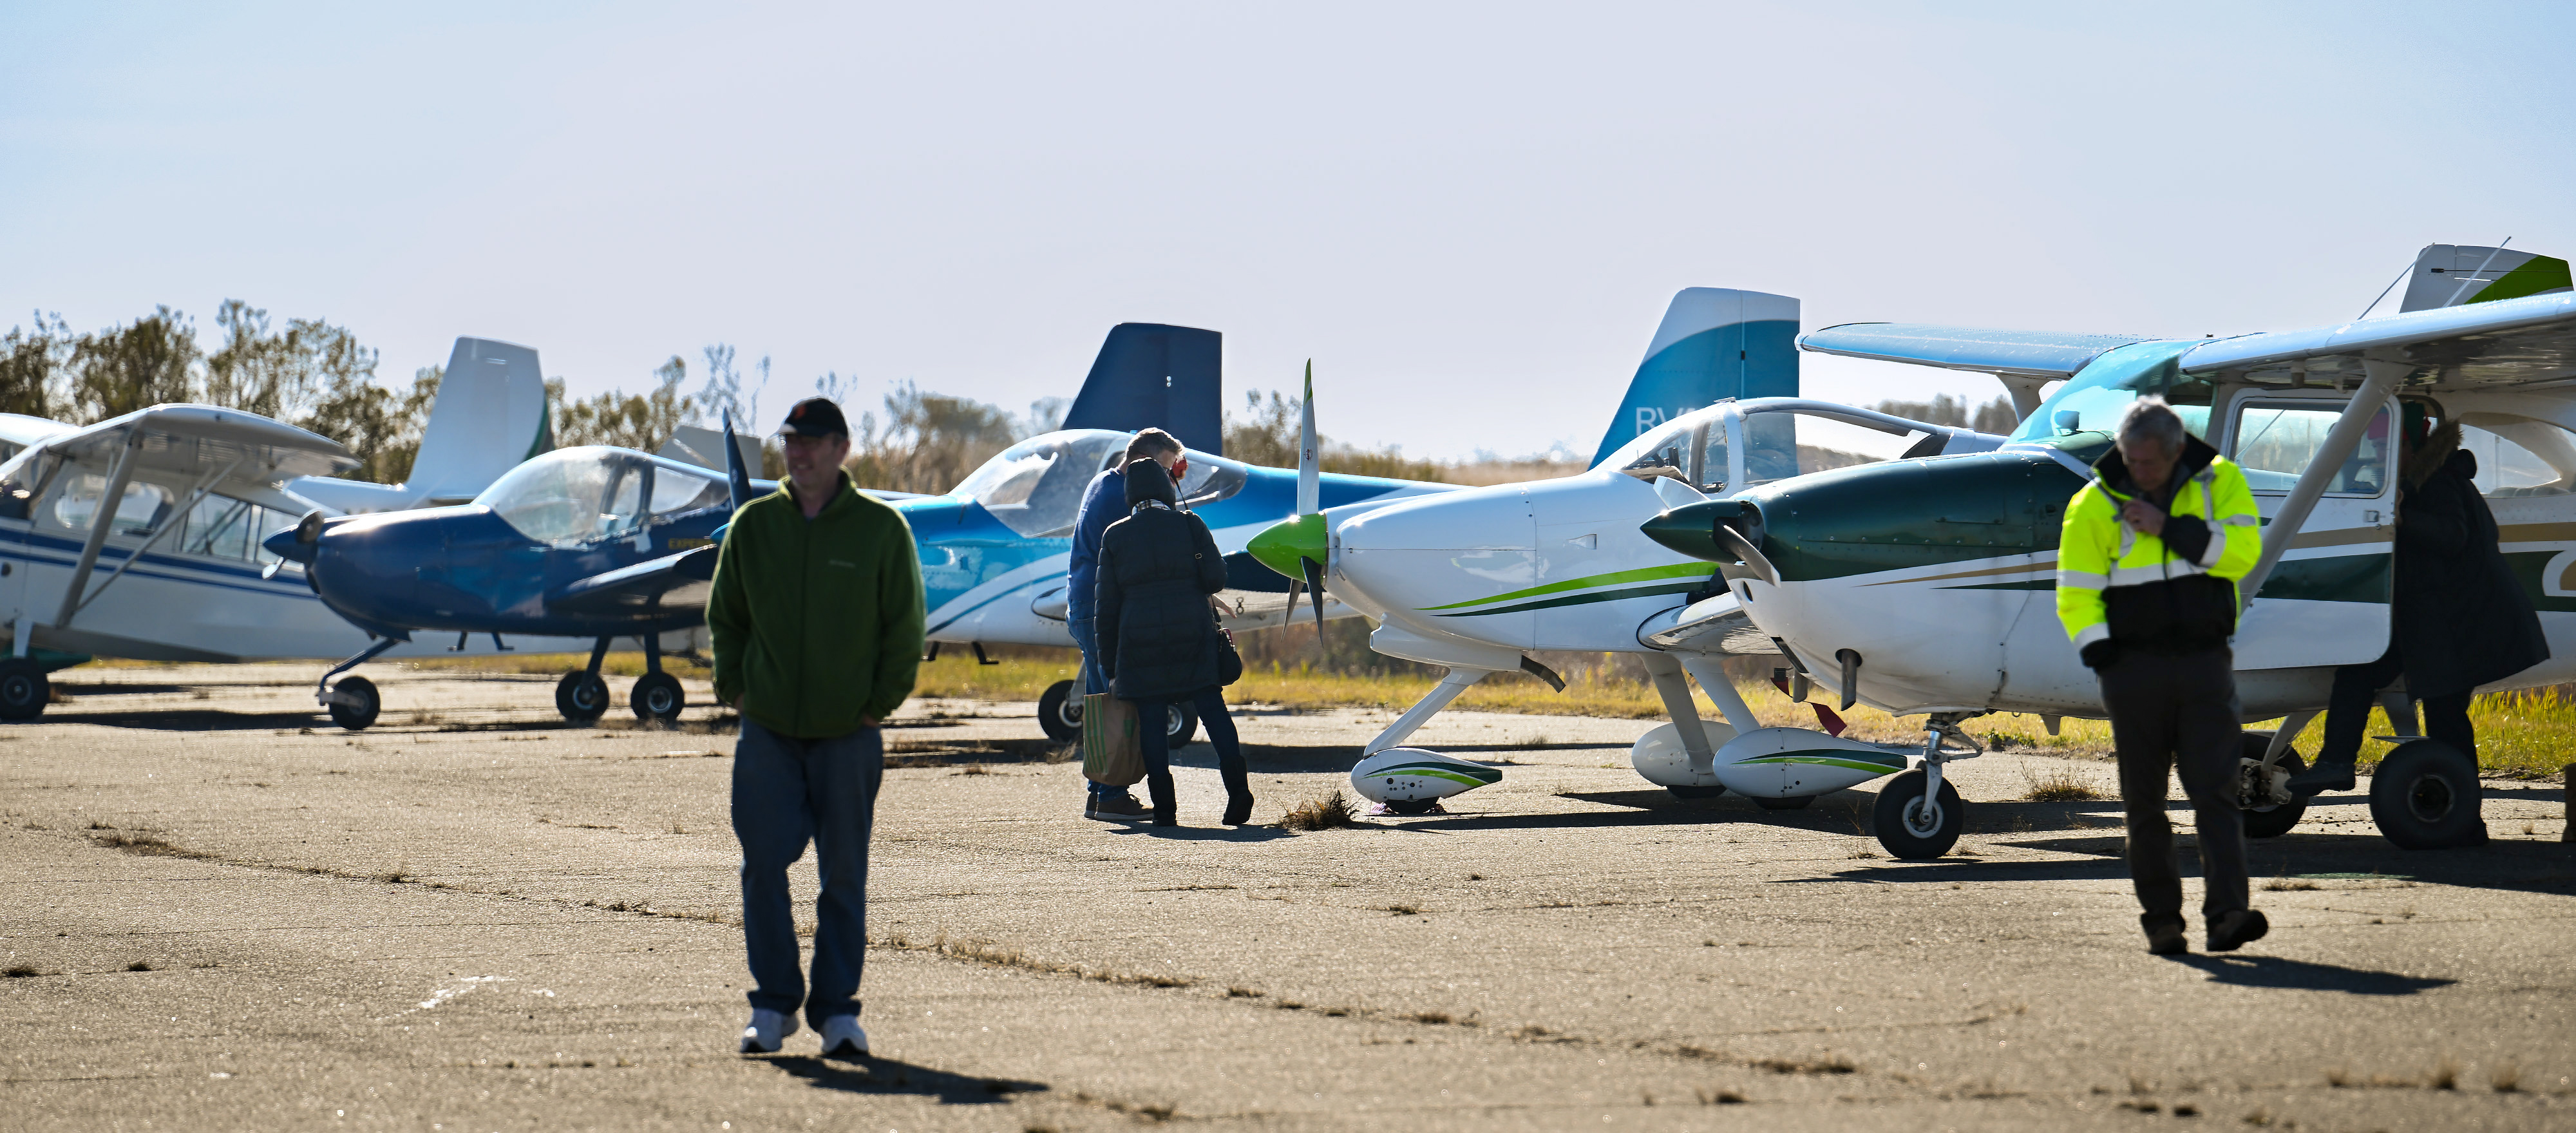 About 30 general aviation pilots participated in the annual Holly Run. Photo by David Tulis.